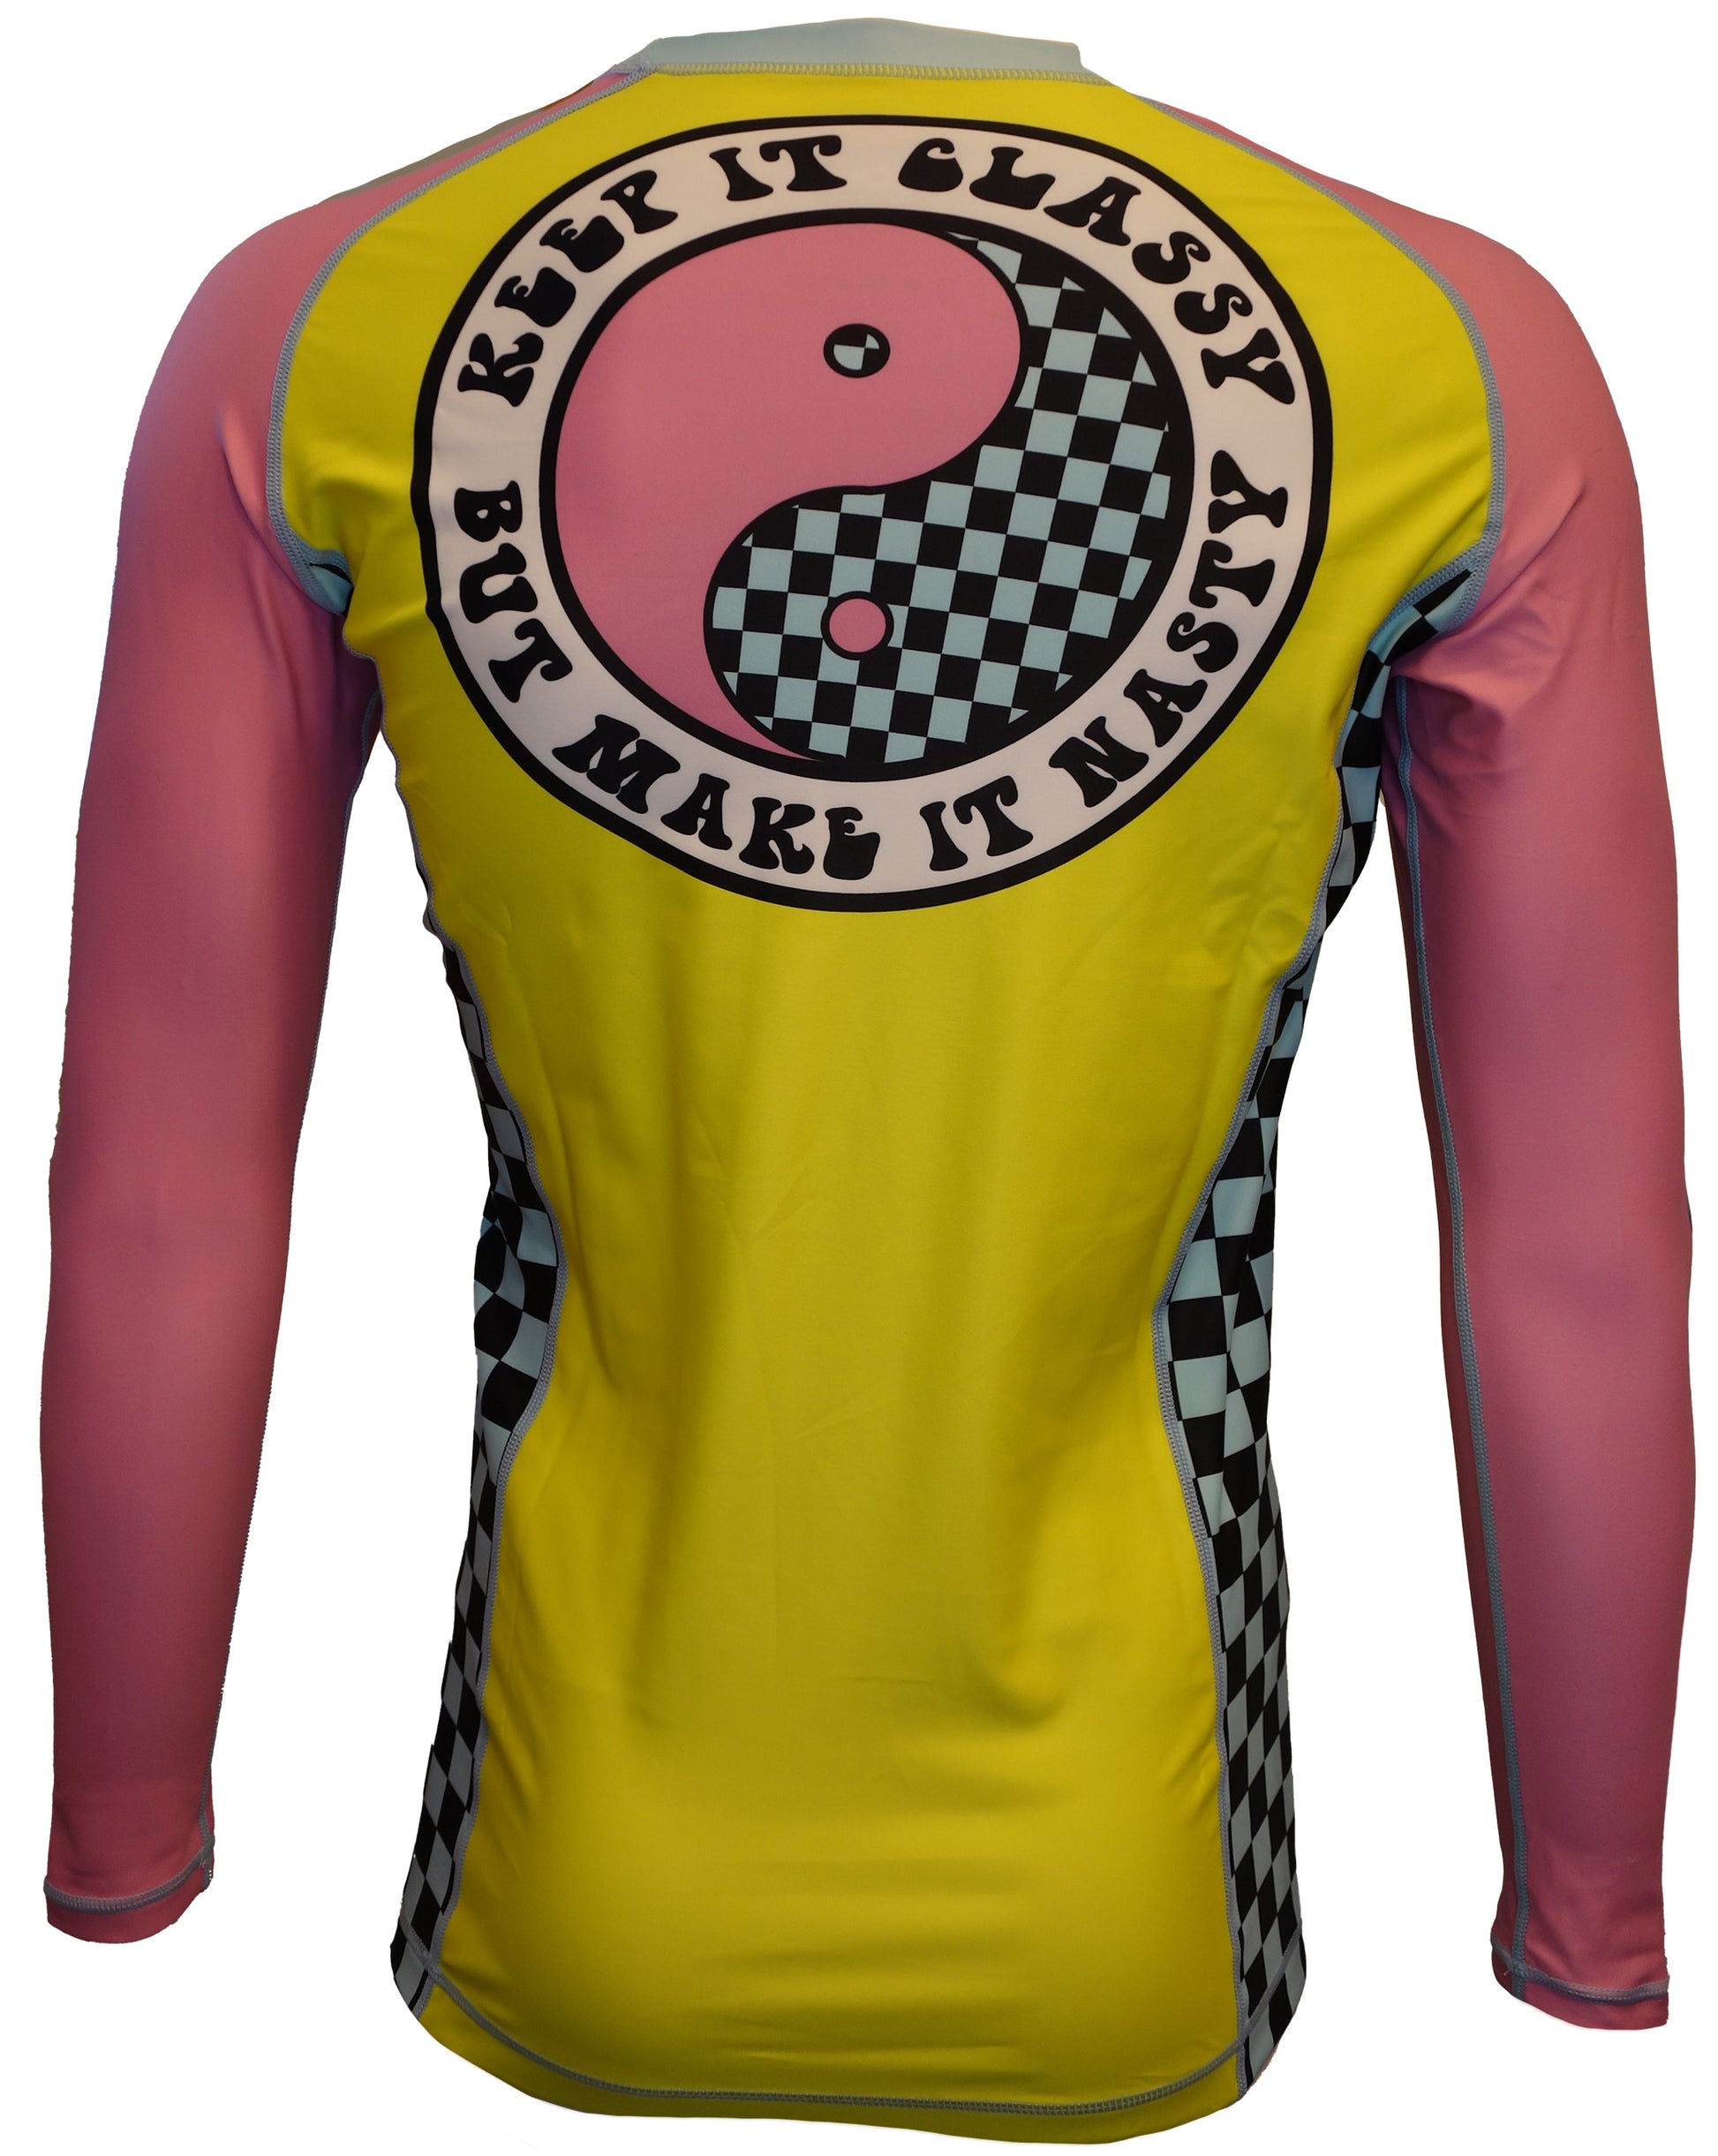 He's looking good and feeling good in the water. Our rash guards